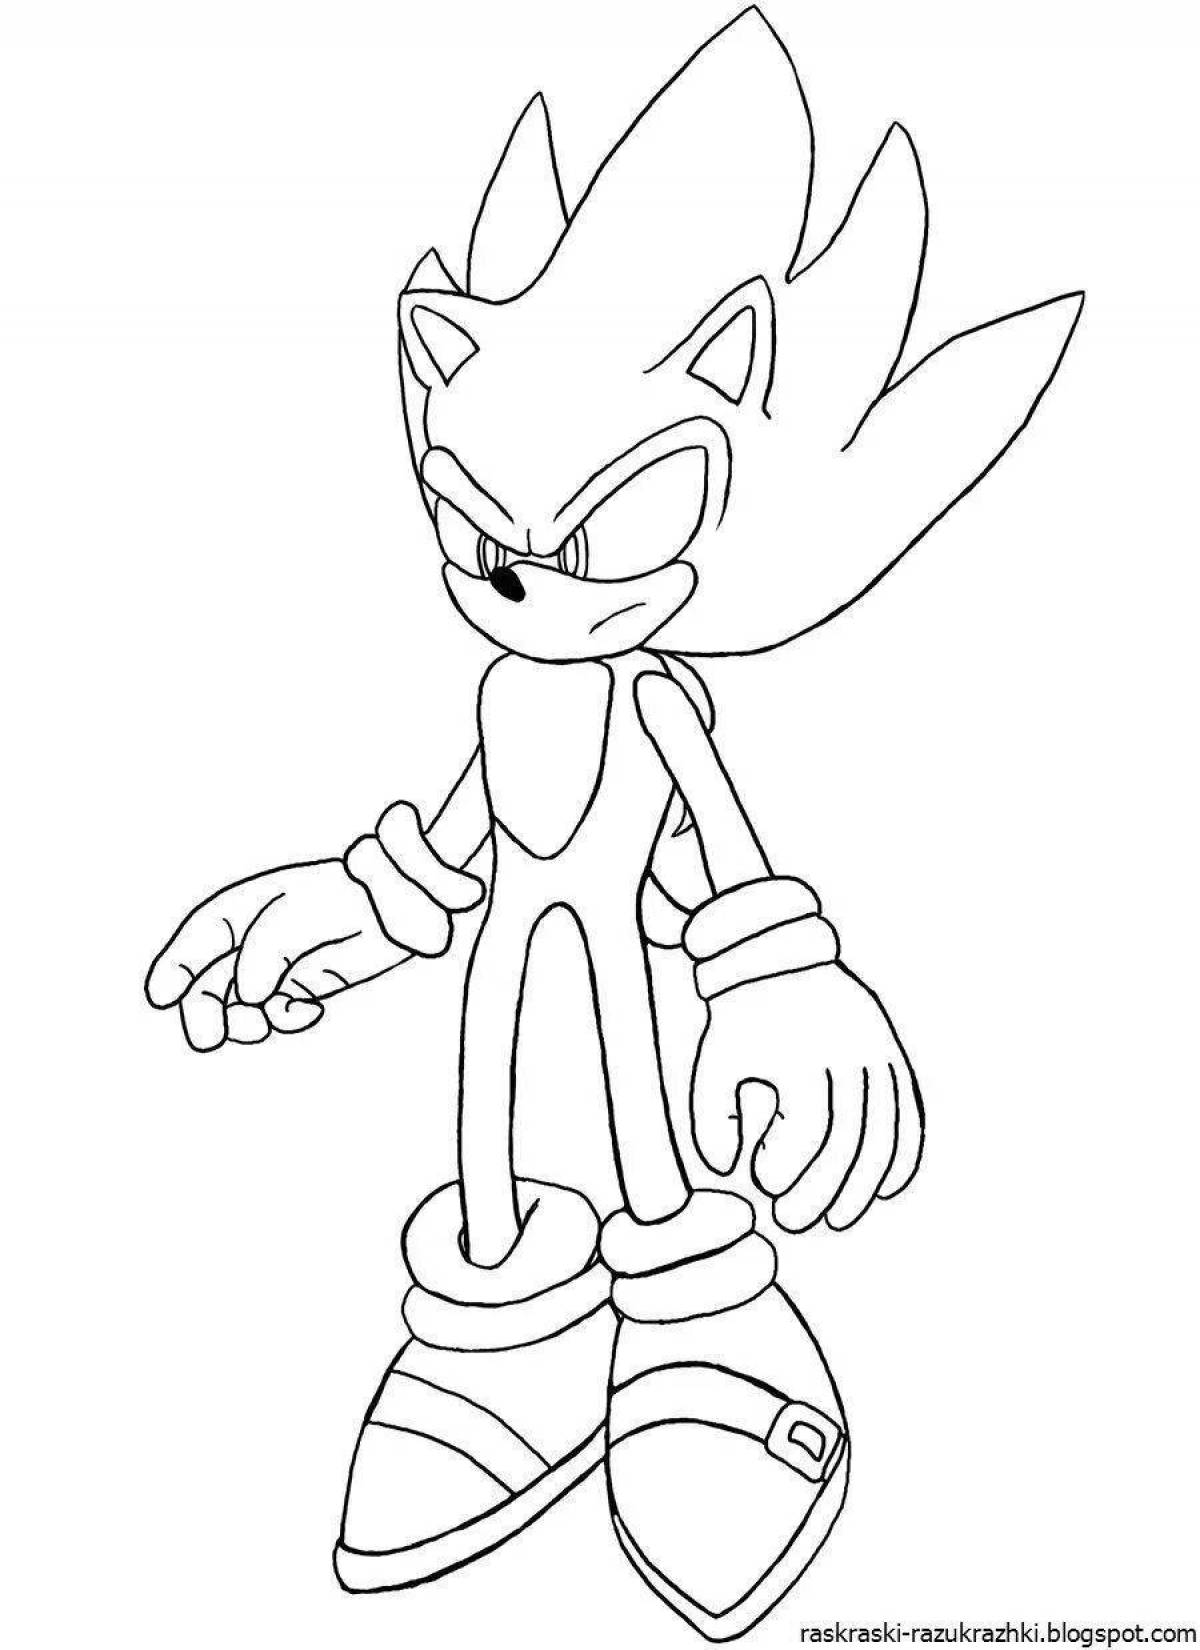 Adorable sonic coloring page